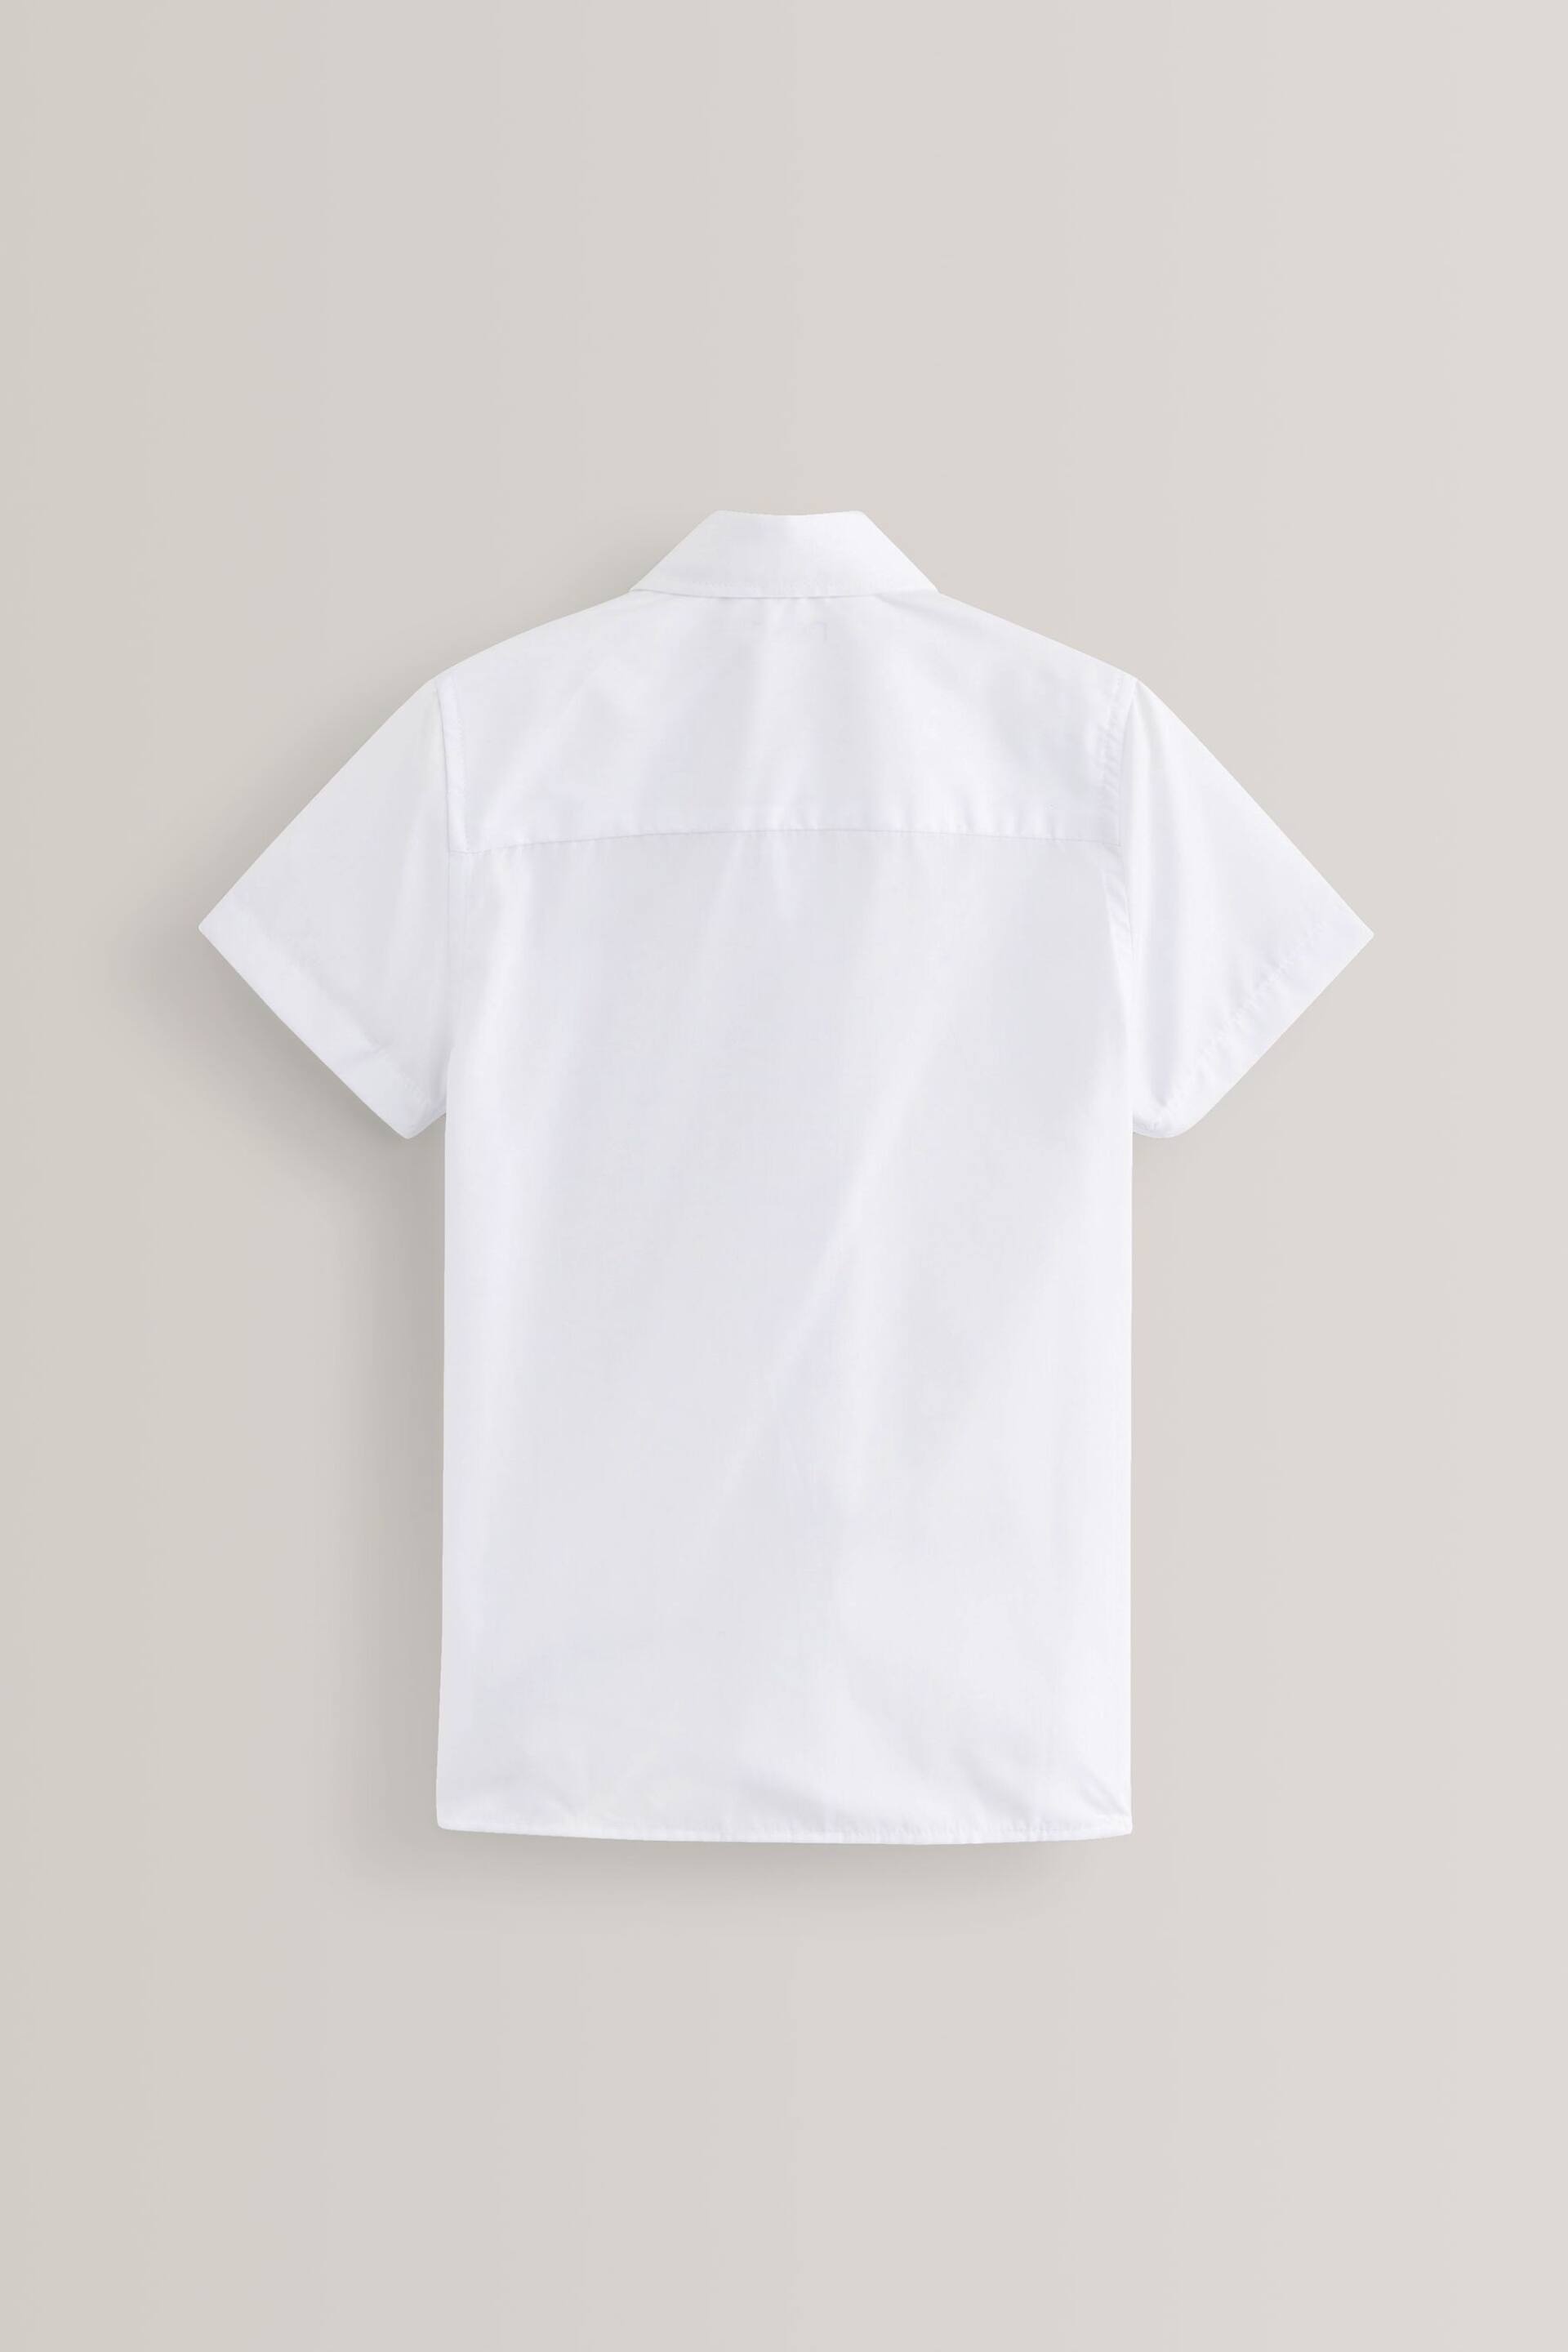 White Slim Fit 2 Pack Short Sleeve School Shirts (3-17yrs) - Image 5 of 6